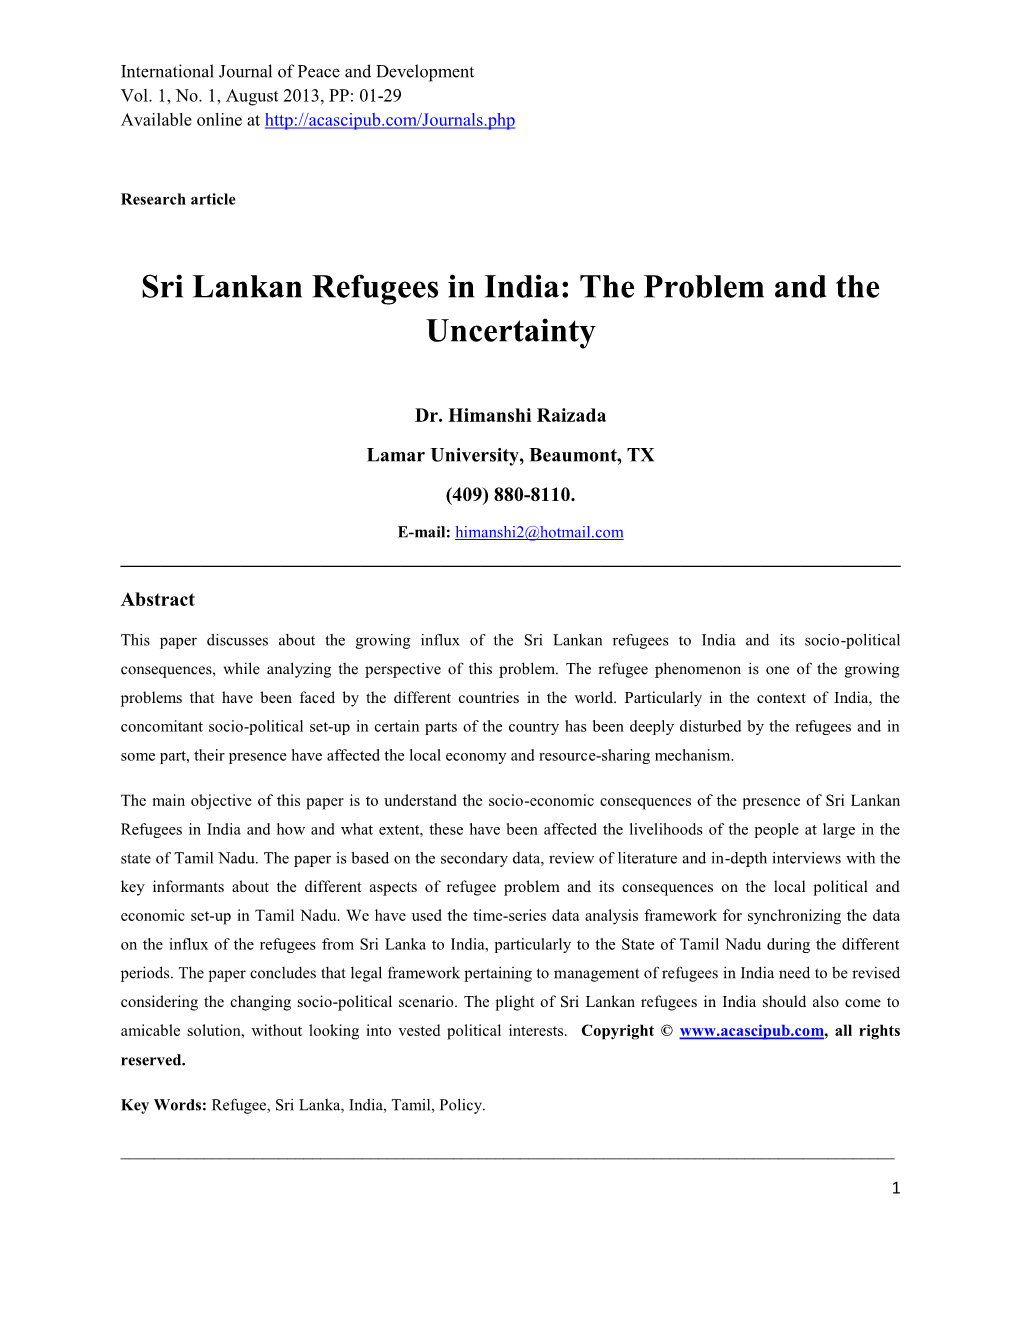 Sri Lankan Refugees in India: the Problem and the Uncertainty